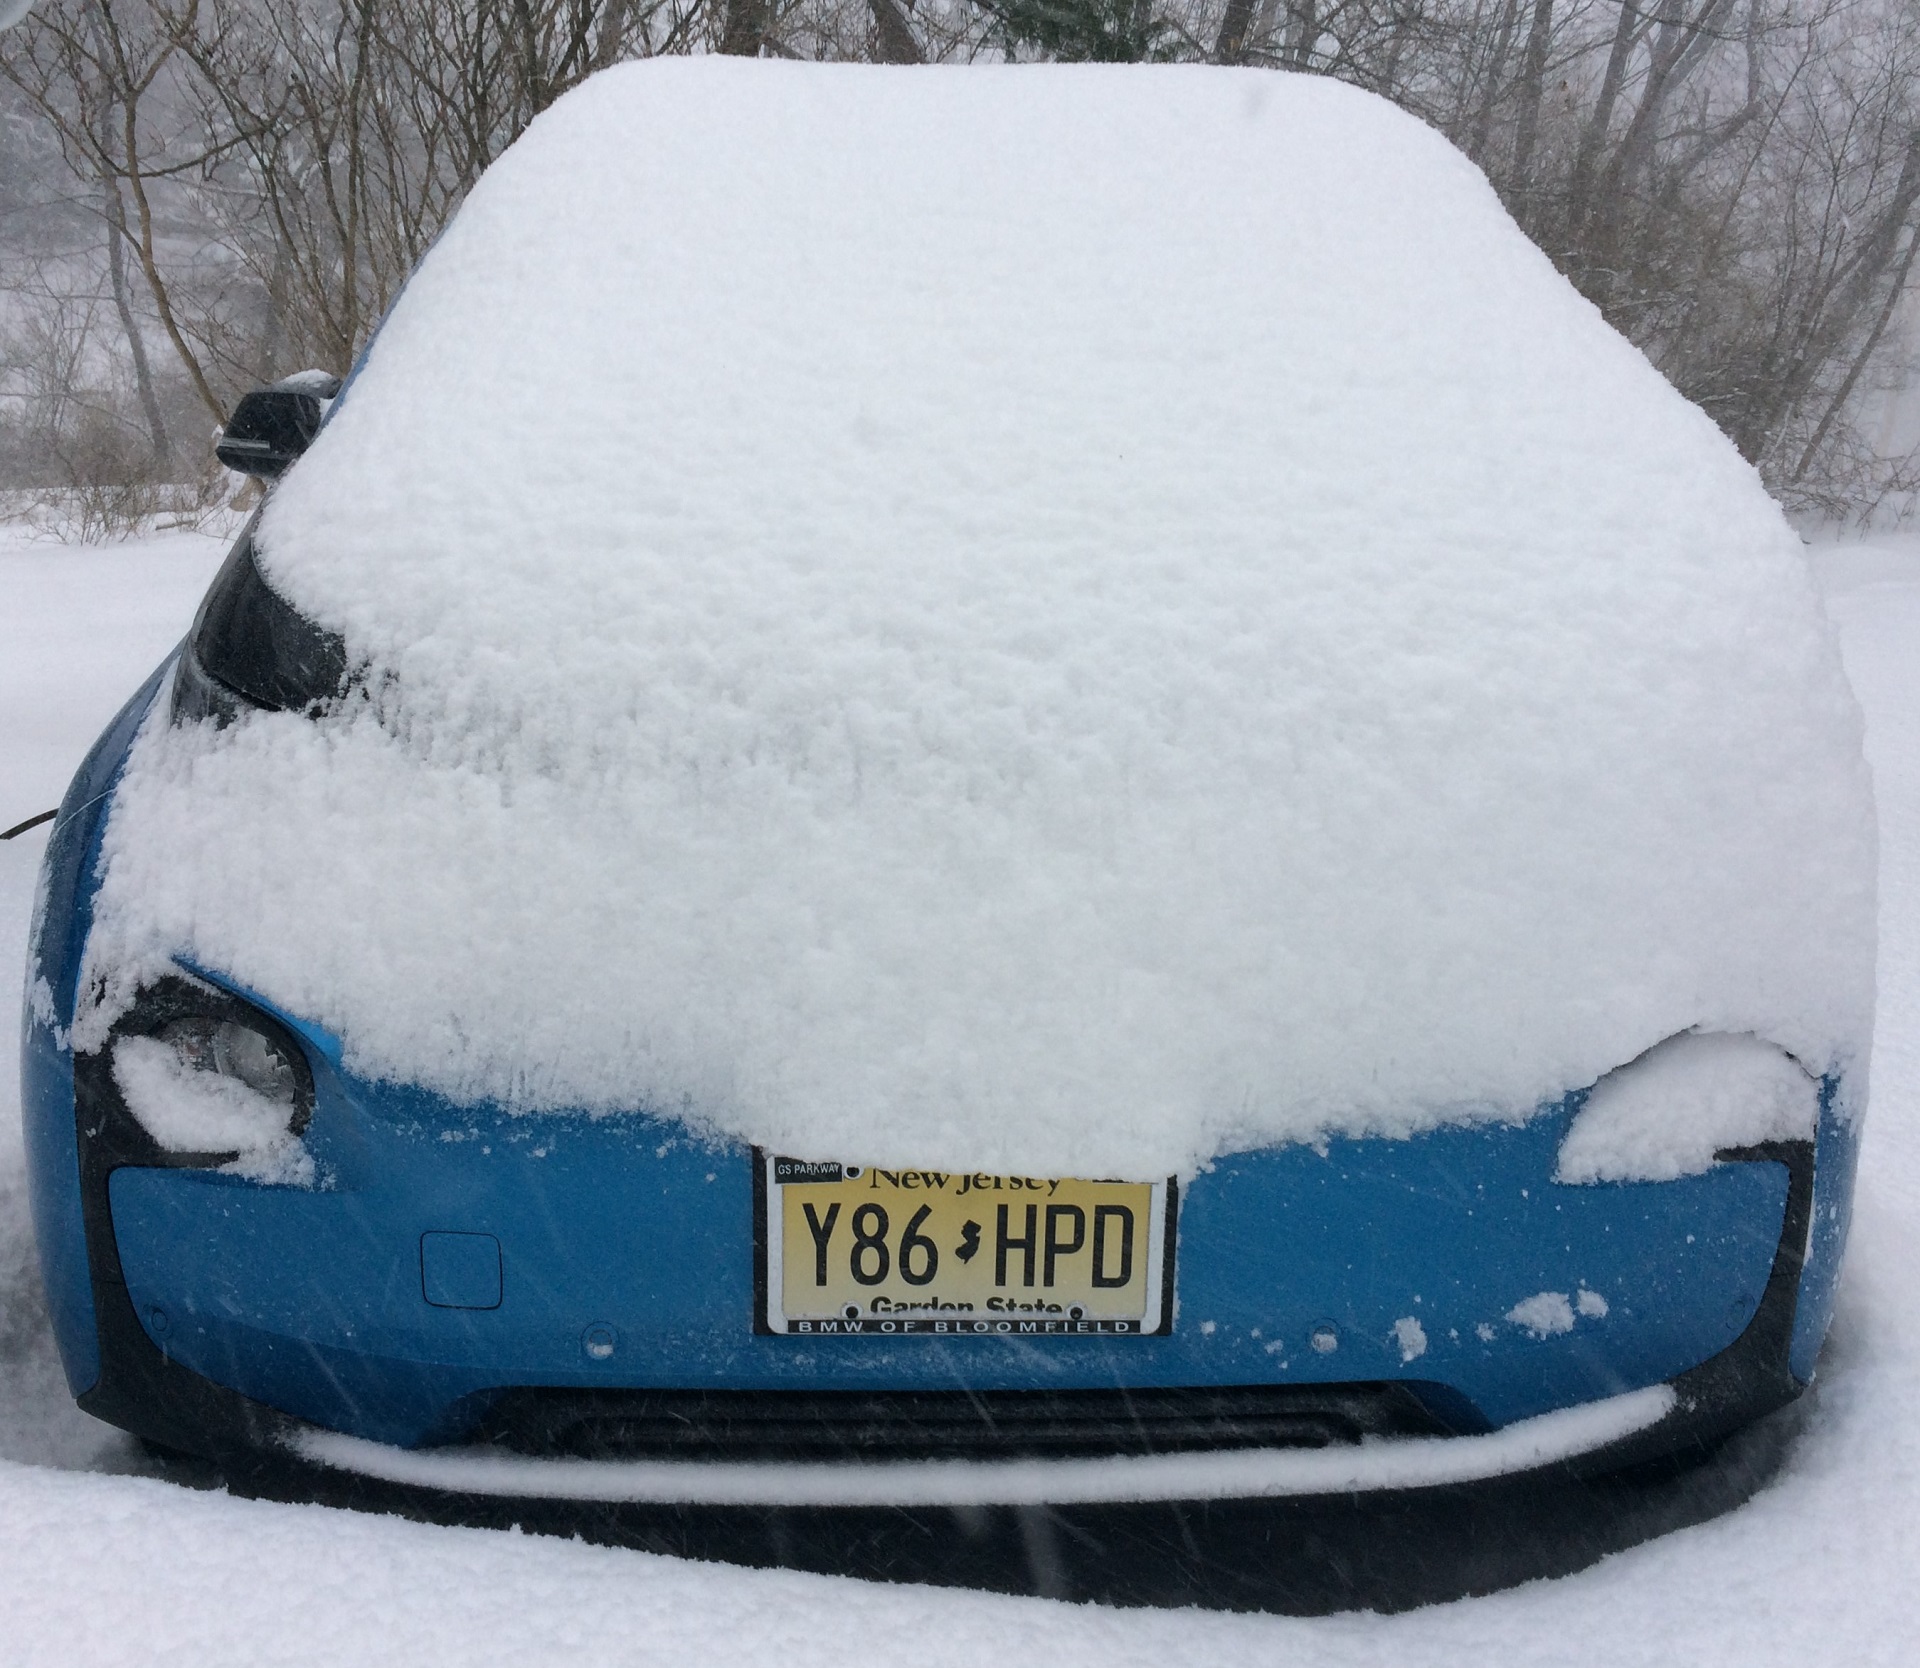 Driving electric cars in winter: tips from experienced owner